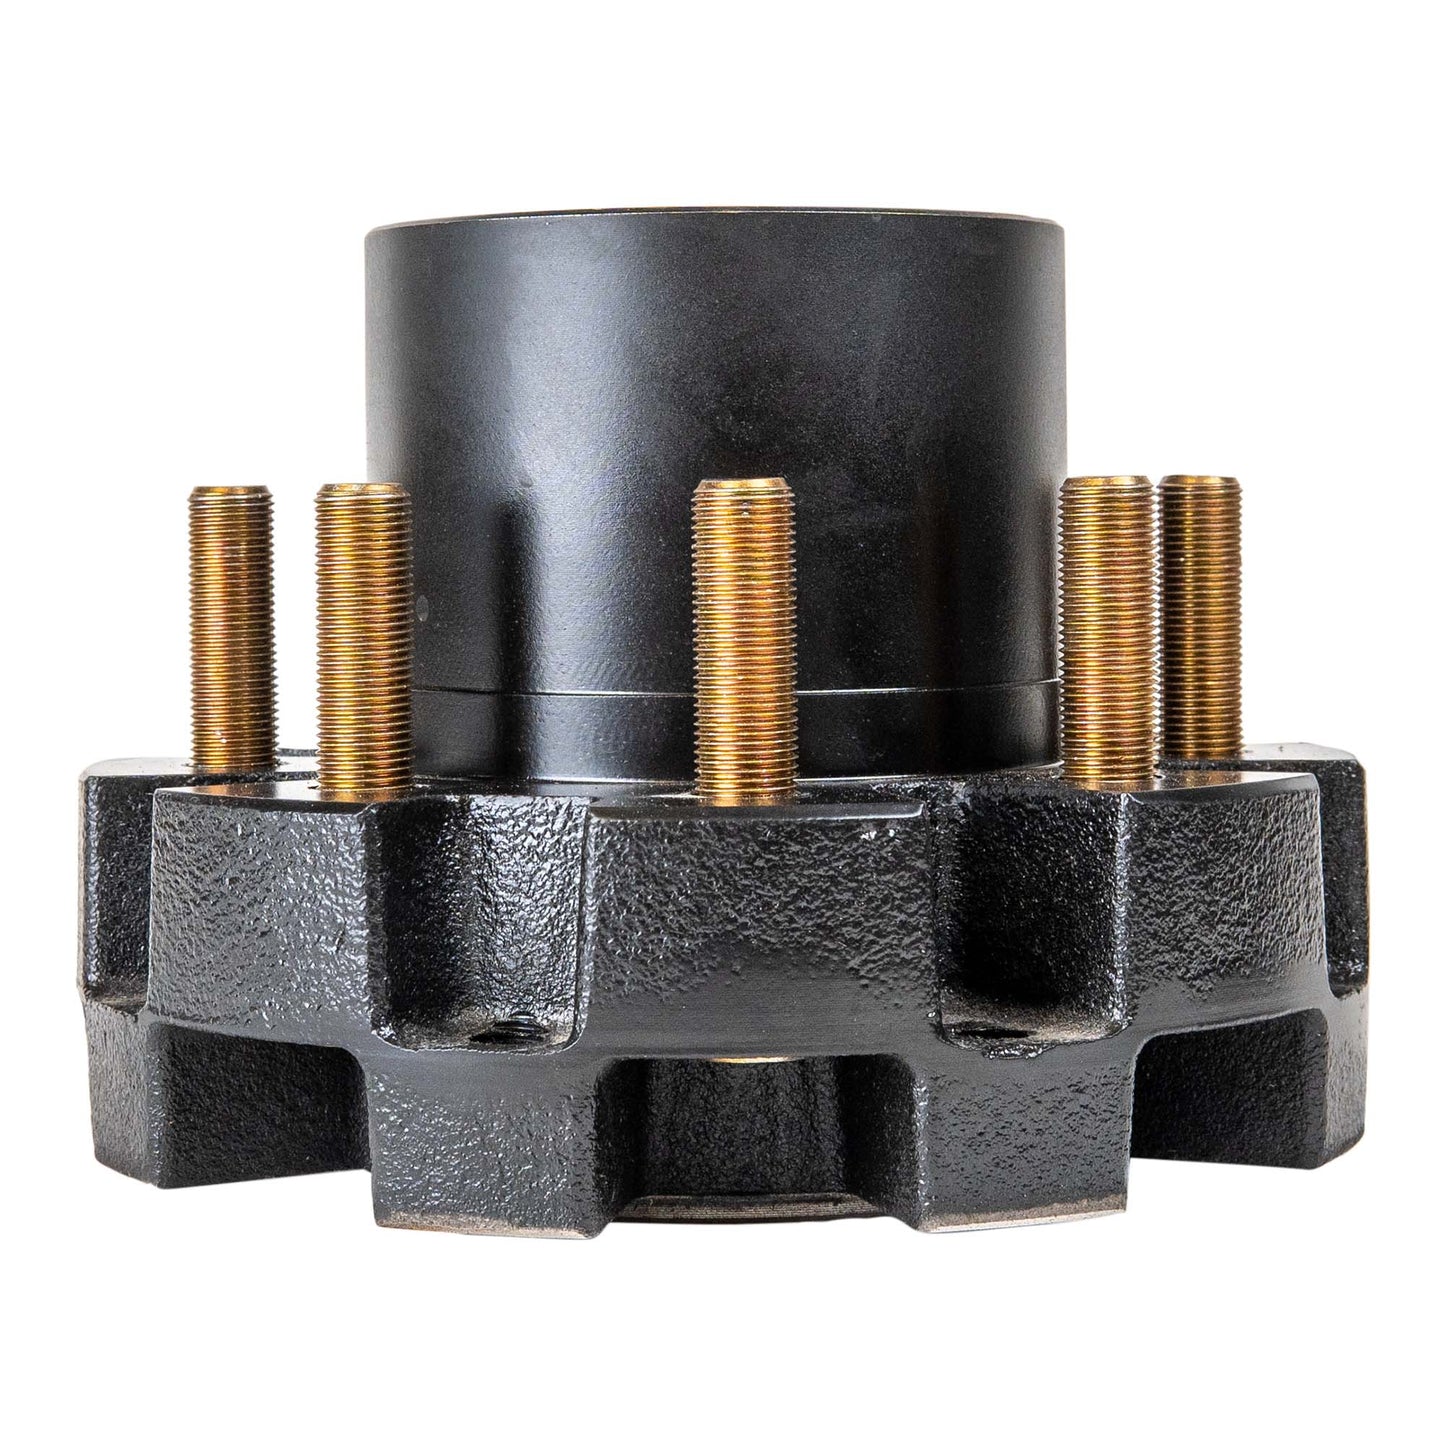 9-10k Trailer Axle Hub- 8 Lug (For Axles Manufactured Before 07/2009) - The Trailer Parts Outlet